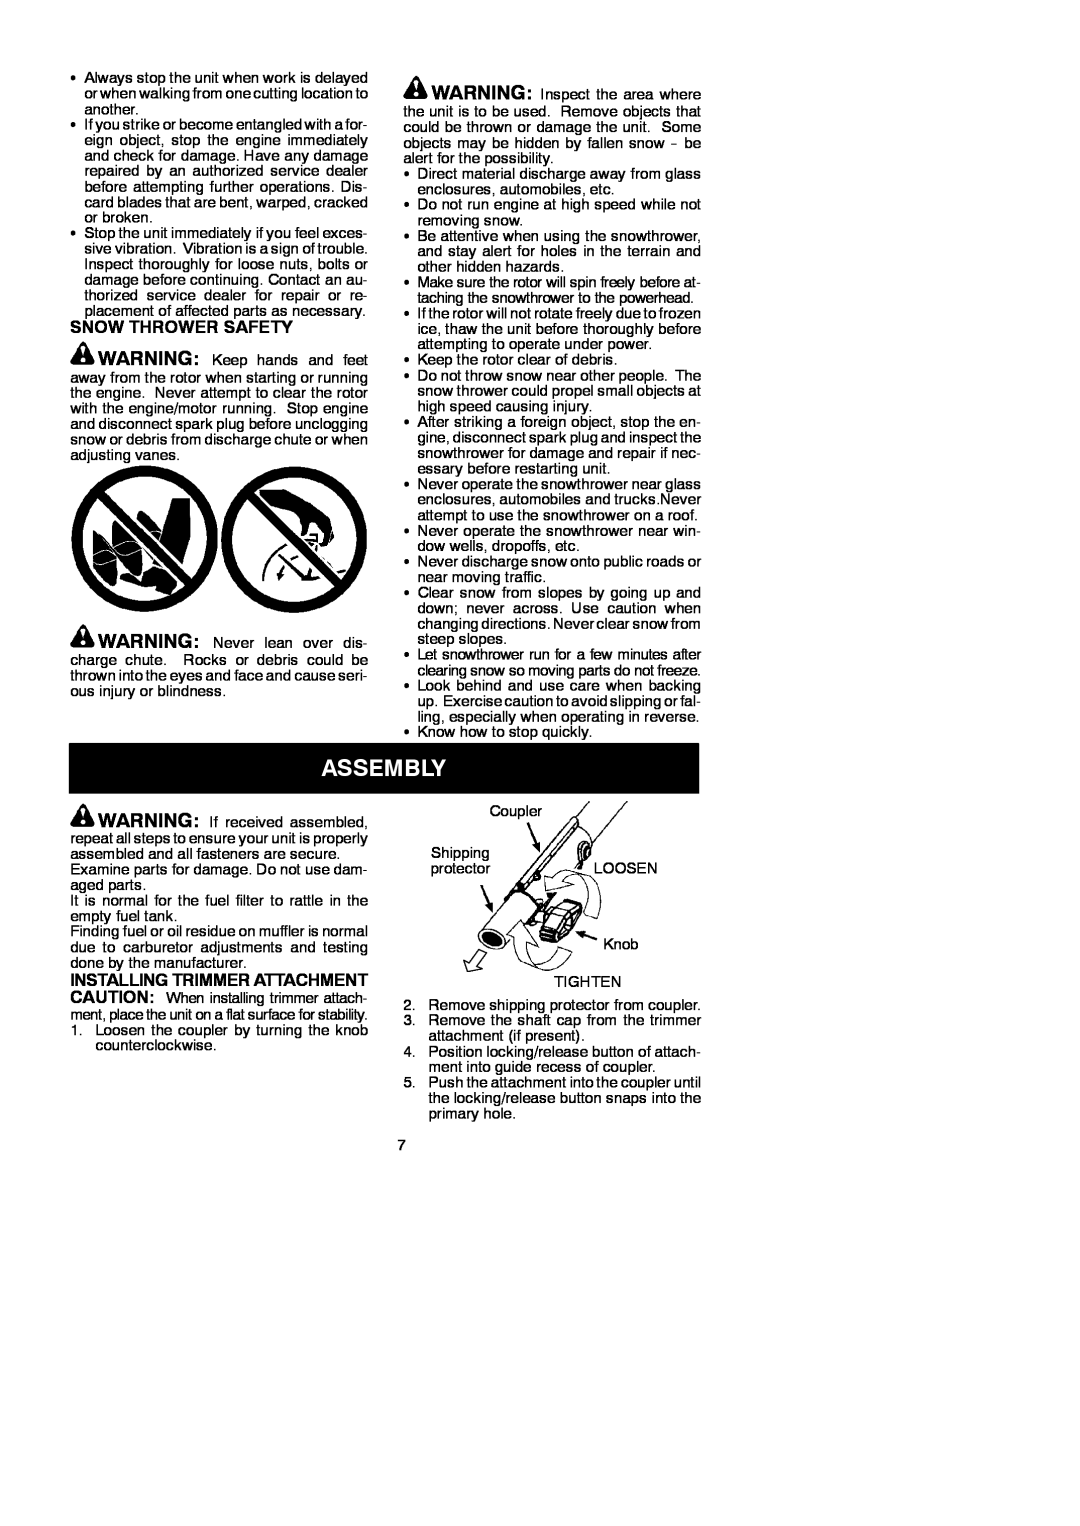 McCulloch 250CXL instruction manual Assembly, Snow Thrower Safety 